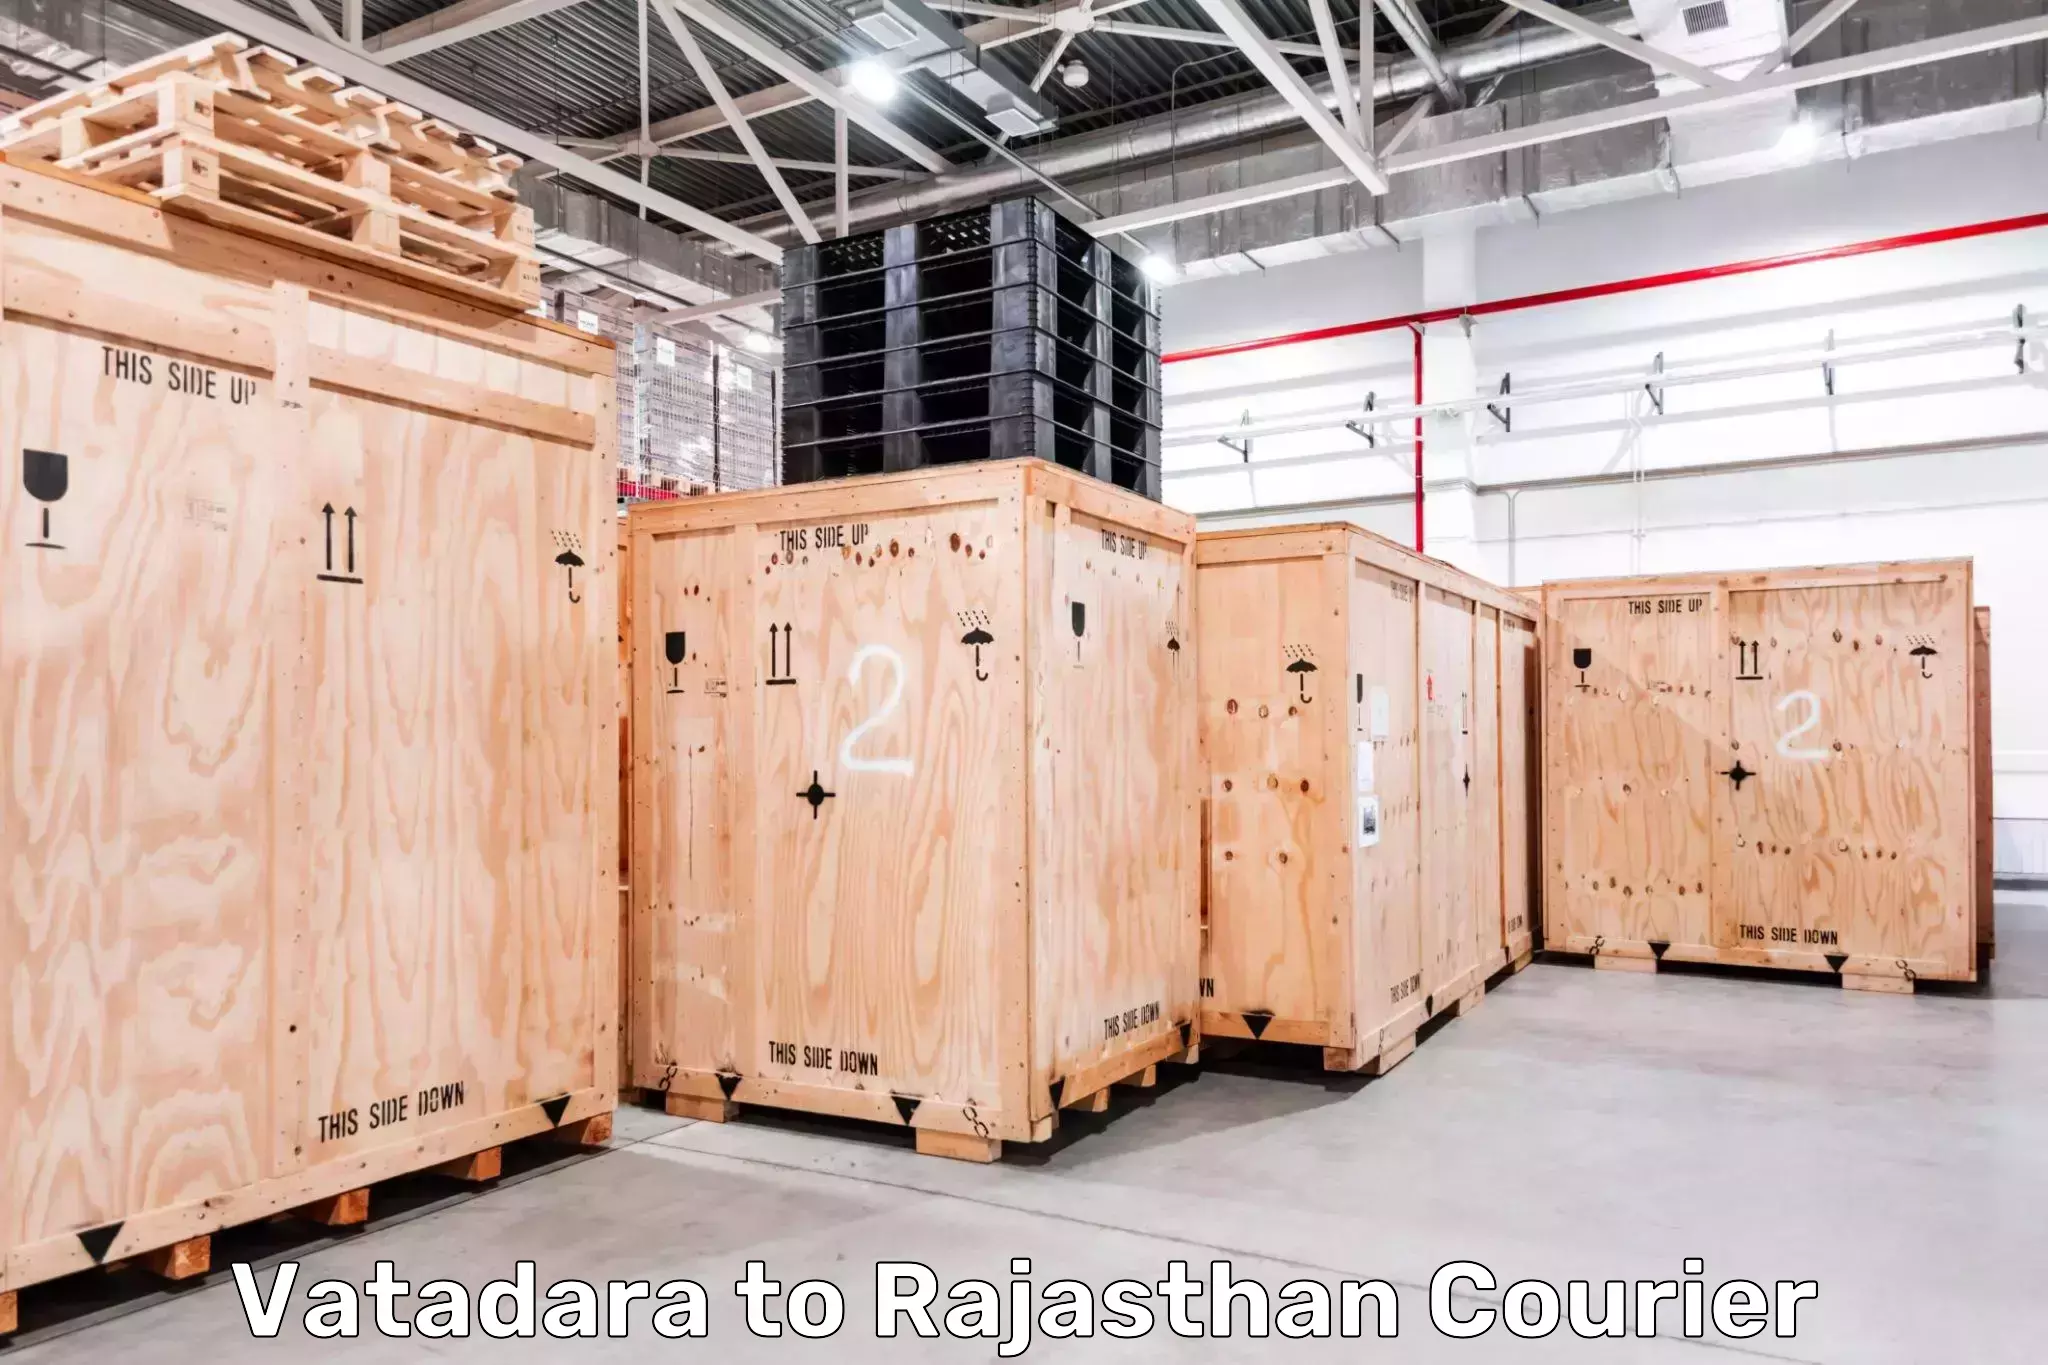 Express delivery network Vatadara to Rajasthan